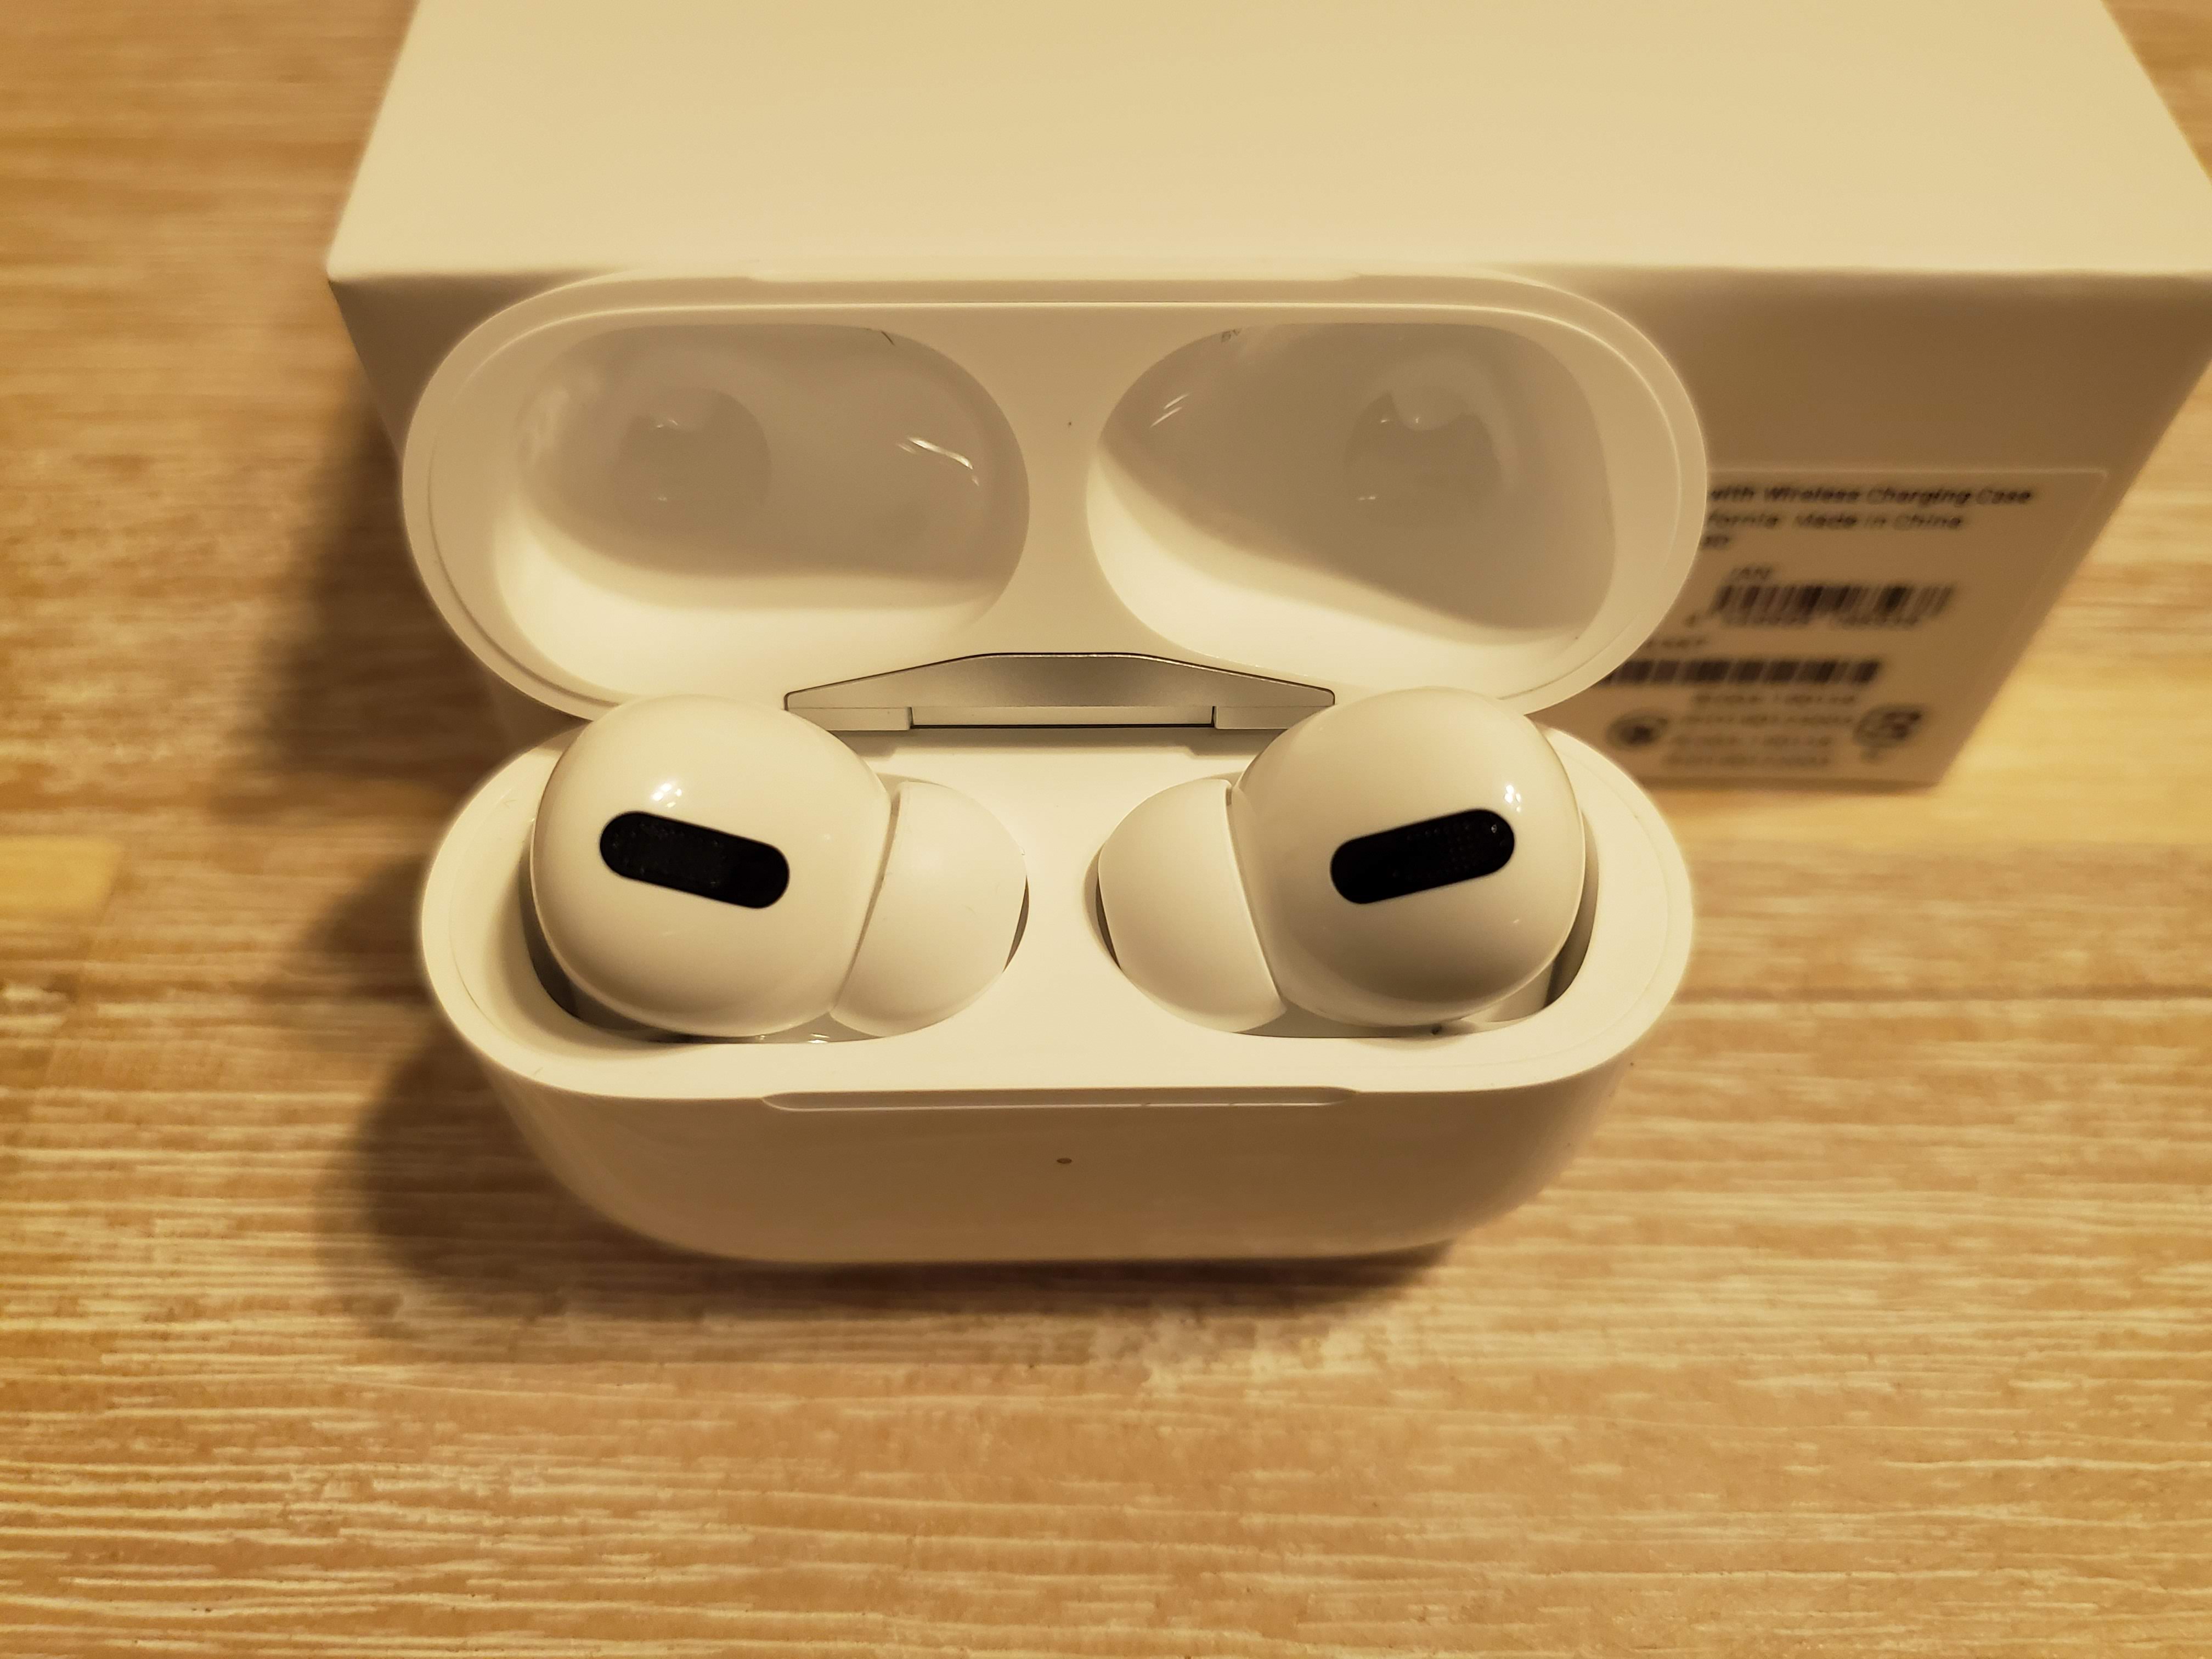 AirPods Proの充電時間は本体は1時間・ケースは4時間でフル充電 | | ACTIVATE｜スマホのワクワクをあなたに。